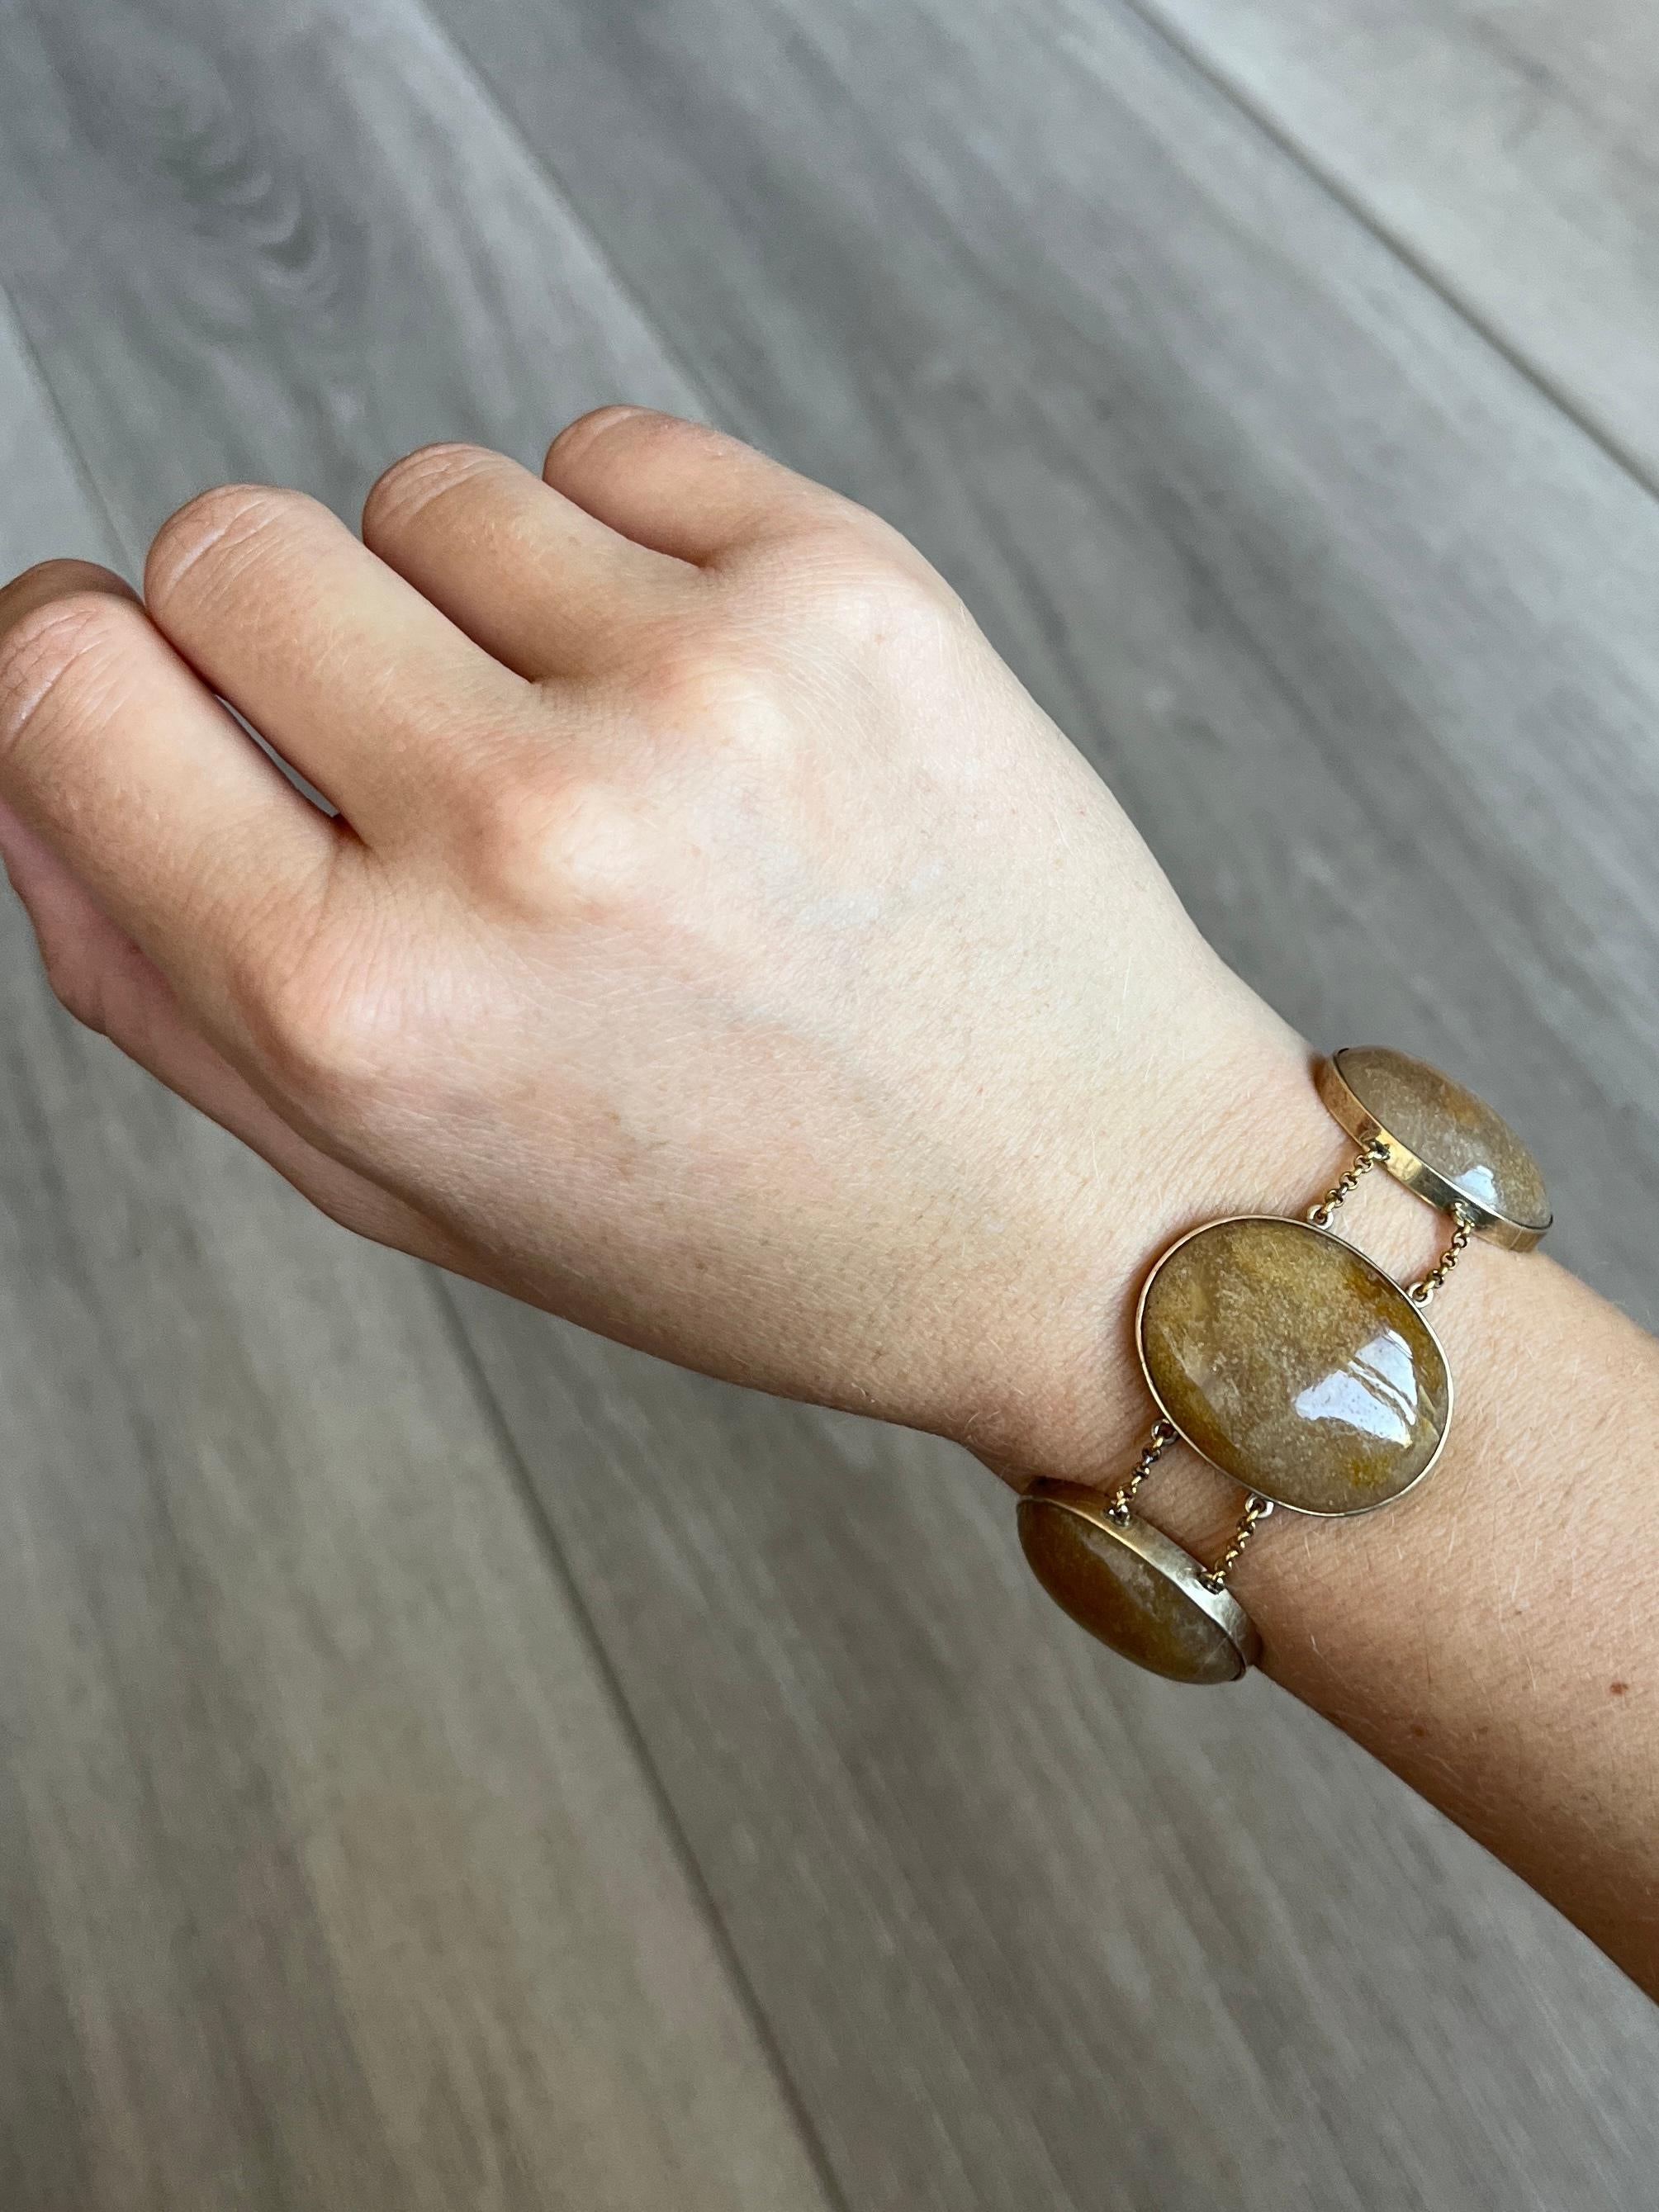 Set in this bracelet are 6 stunning agate stones with brown, grey and white tones running through them. The stones are set in simple settings which are modelled in 9ct gold. 

Length: 17.5cm
Width: 23-31mm

Weight: 33.3g